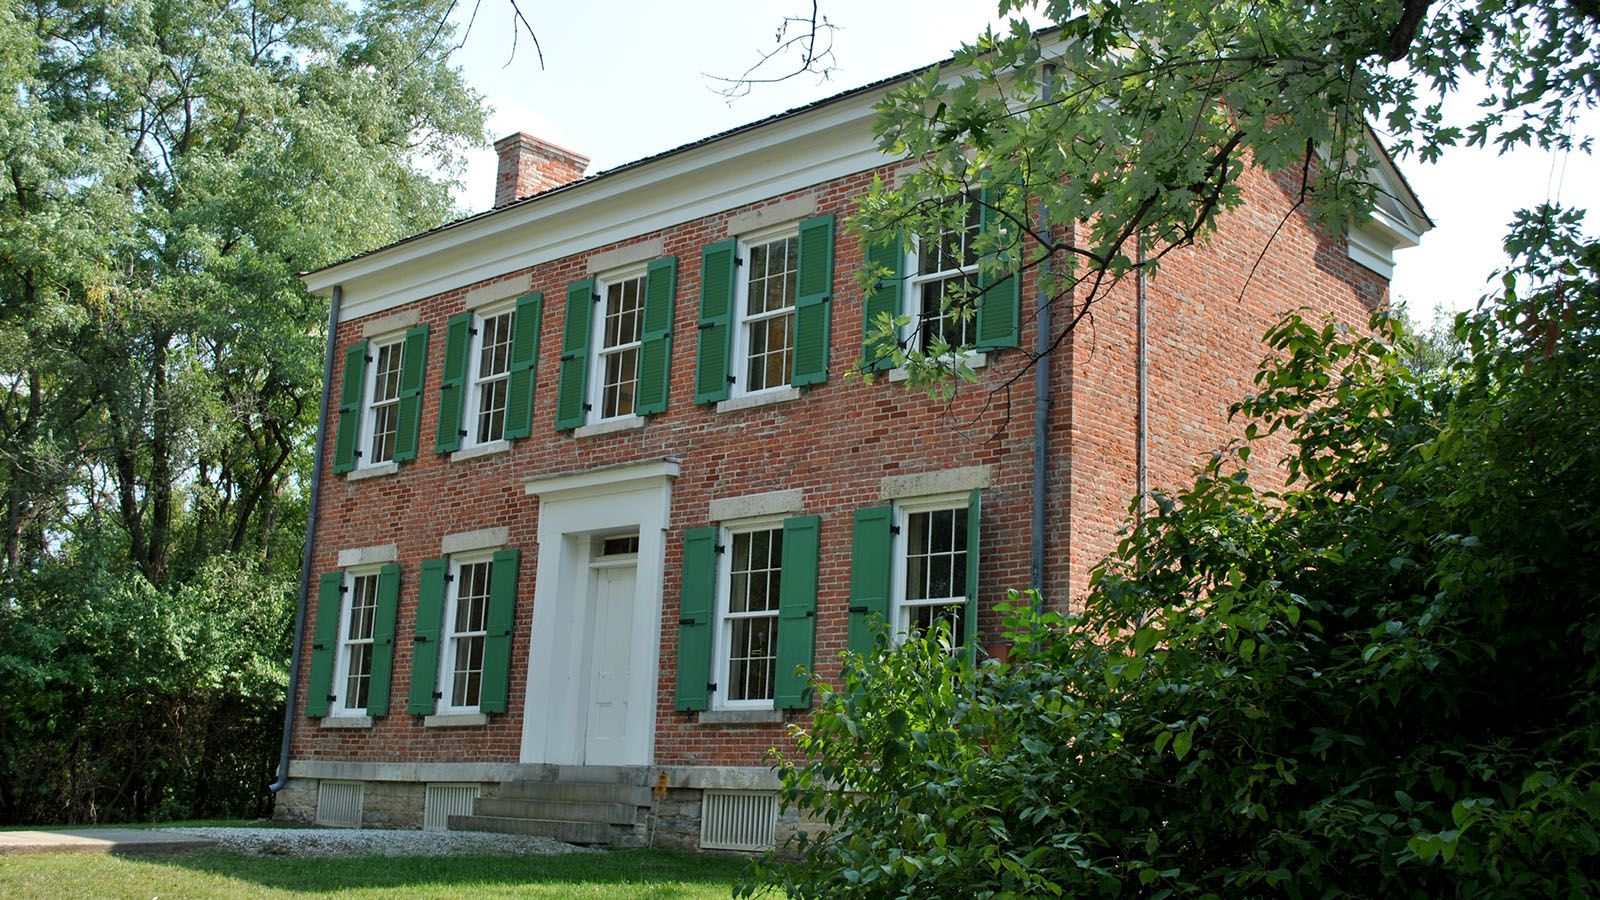 Miami Indian Heritage Days are held at the Chief Richardville House.